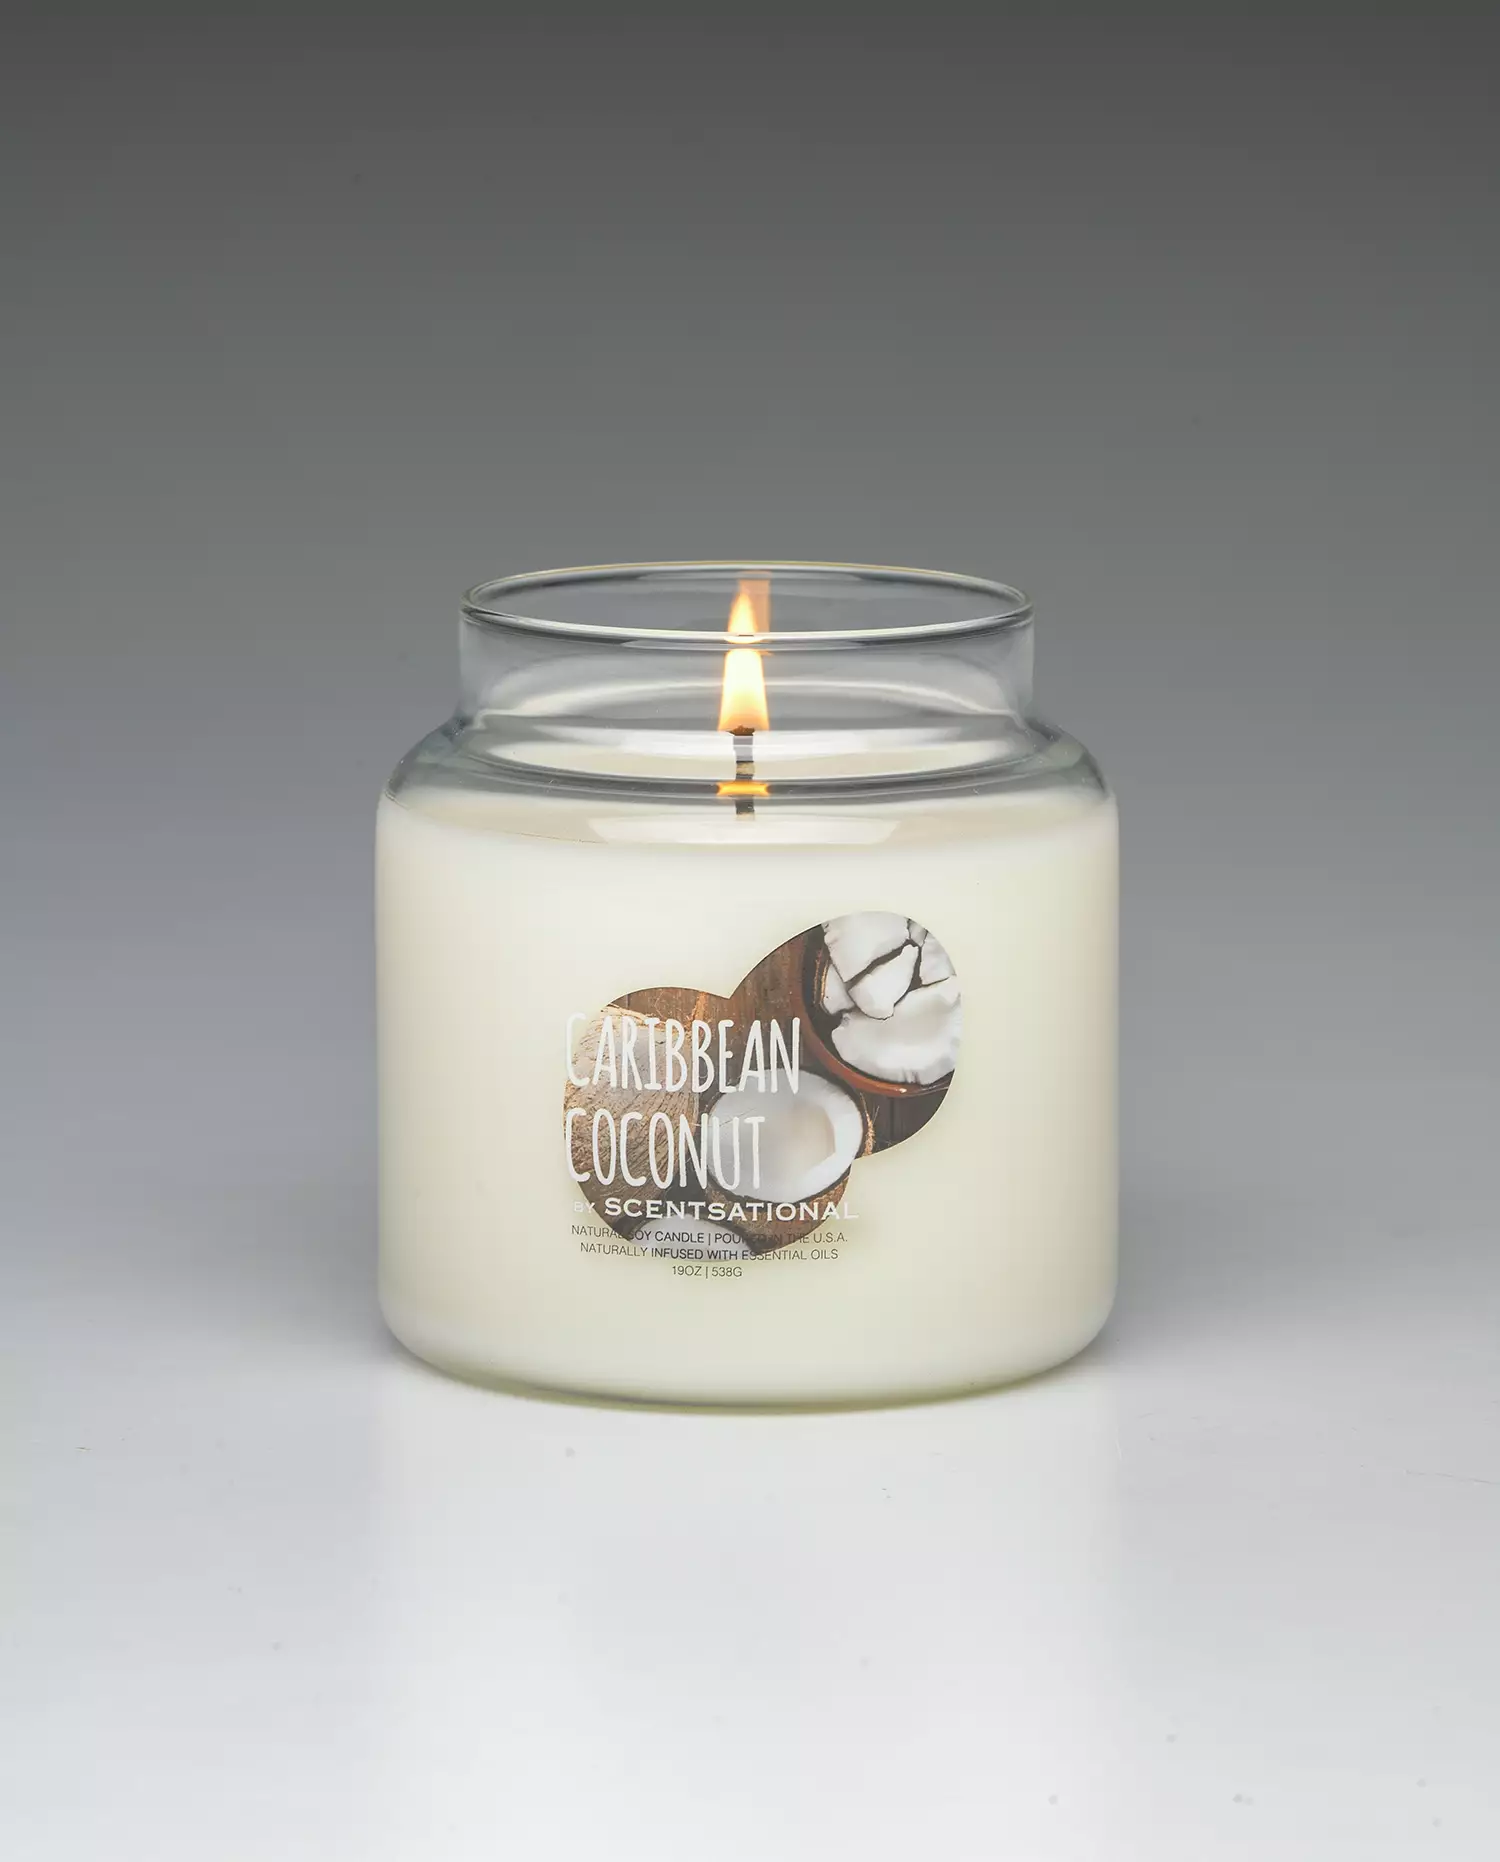 Caribbean Coconut 19oz scented candle burning